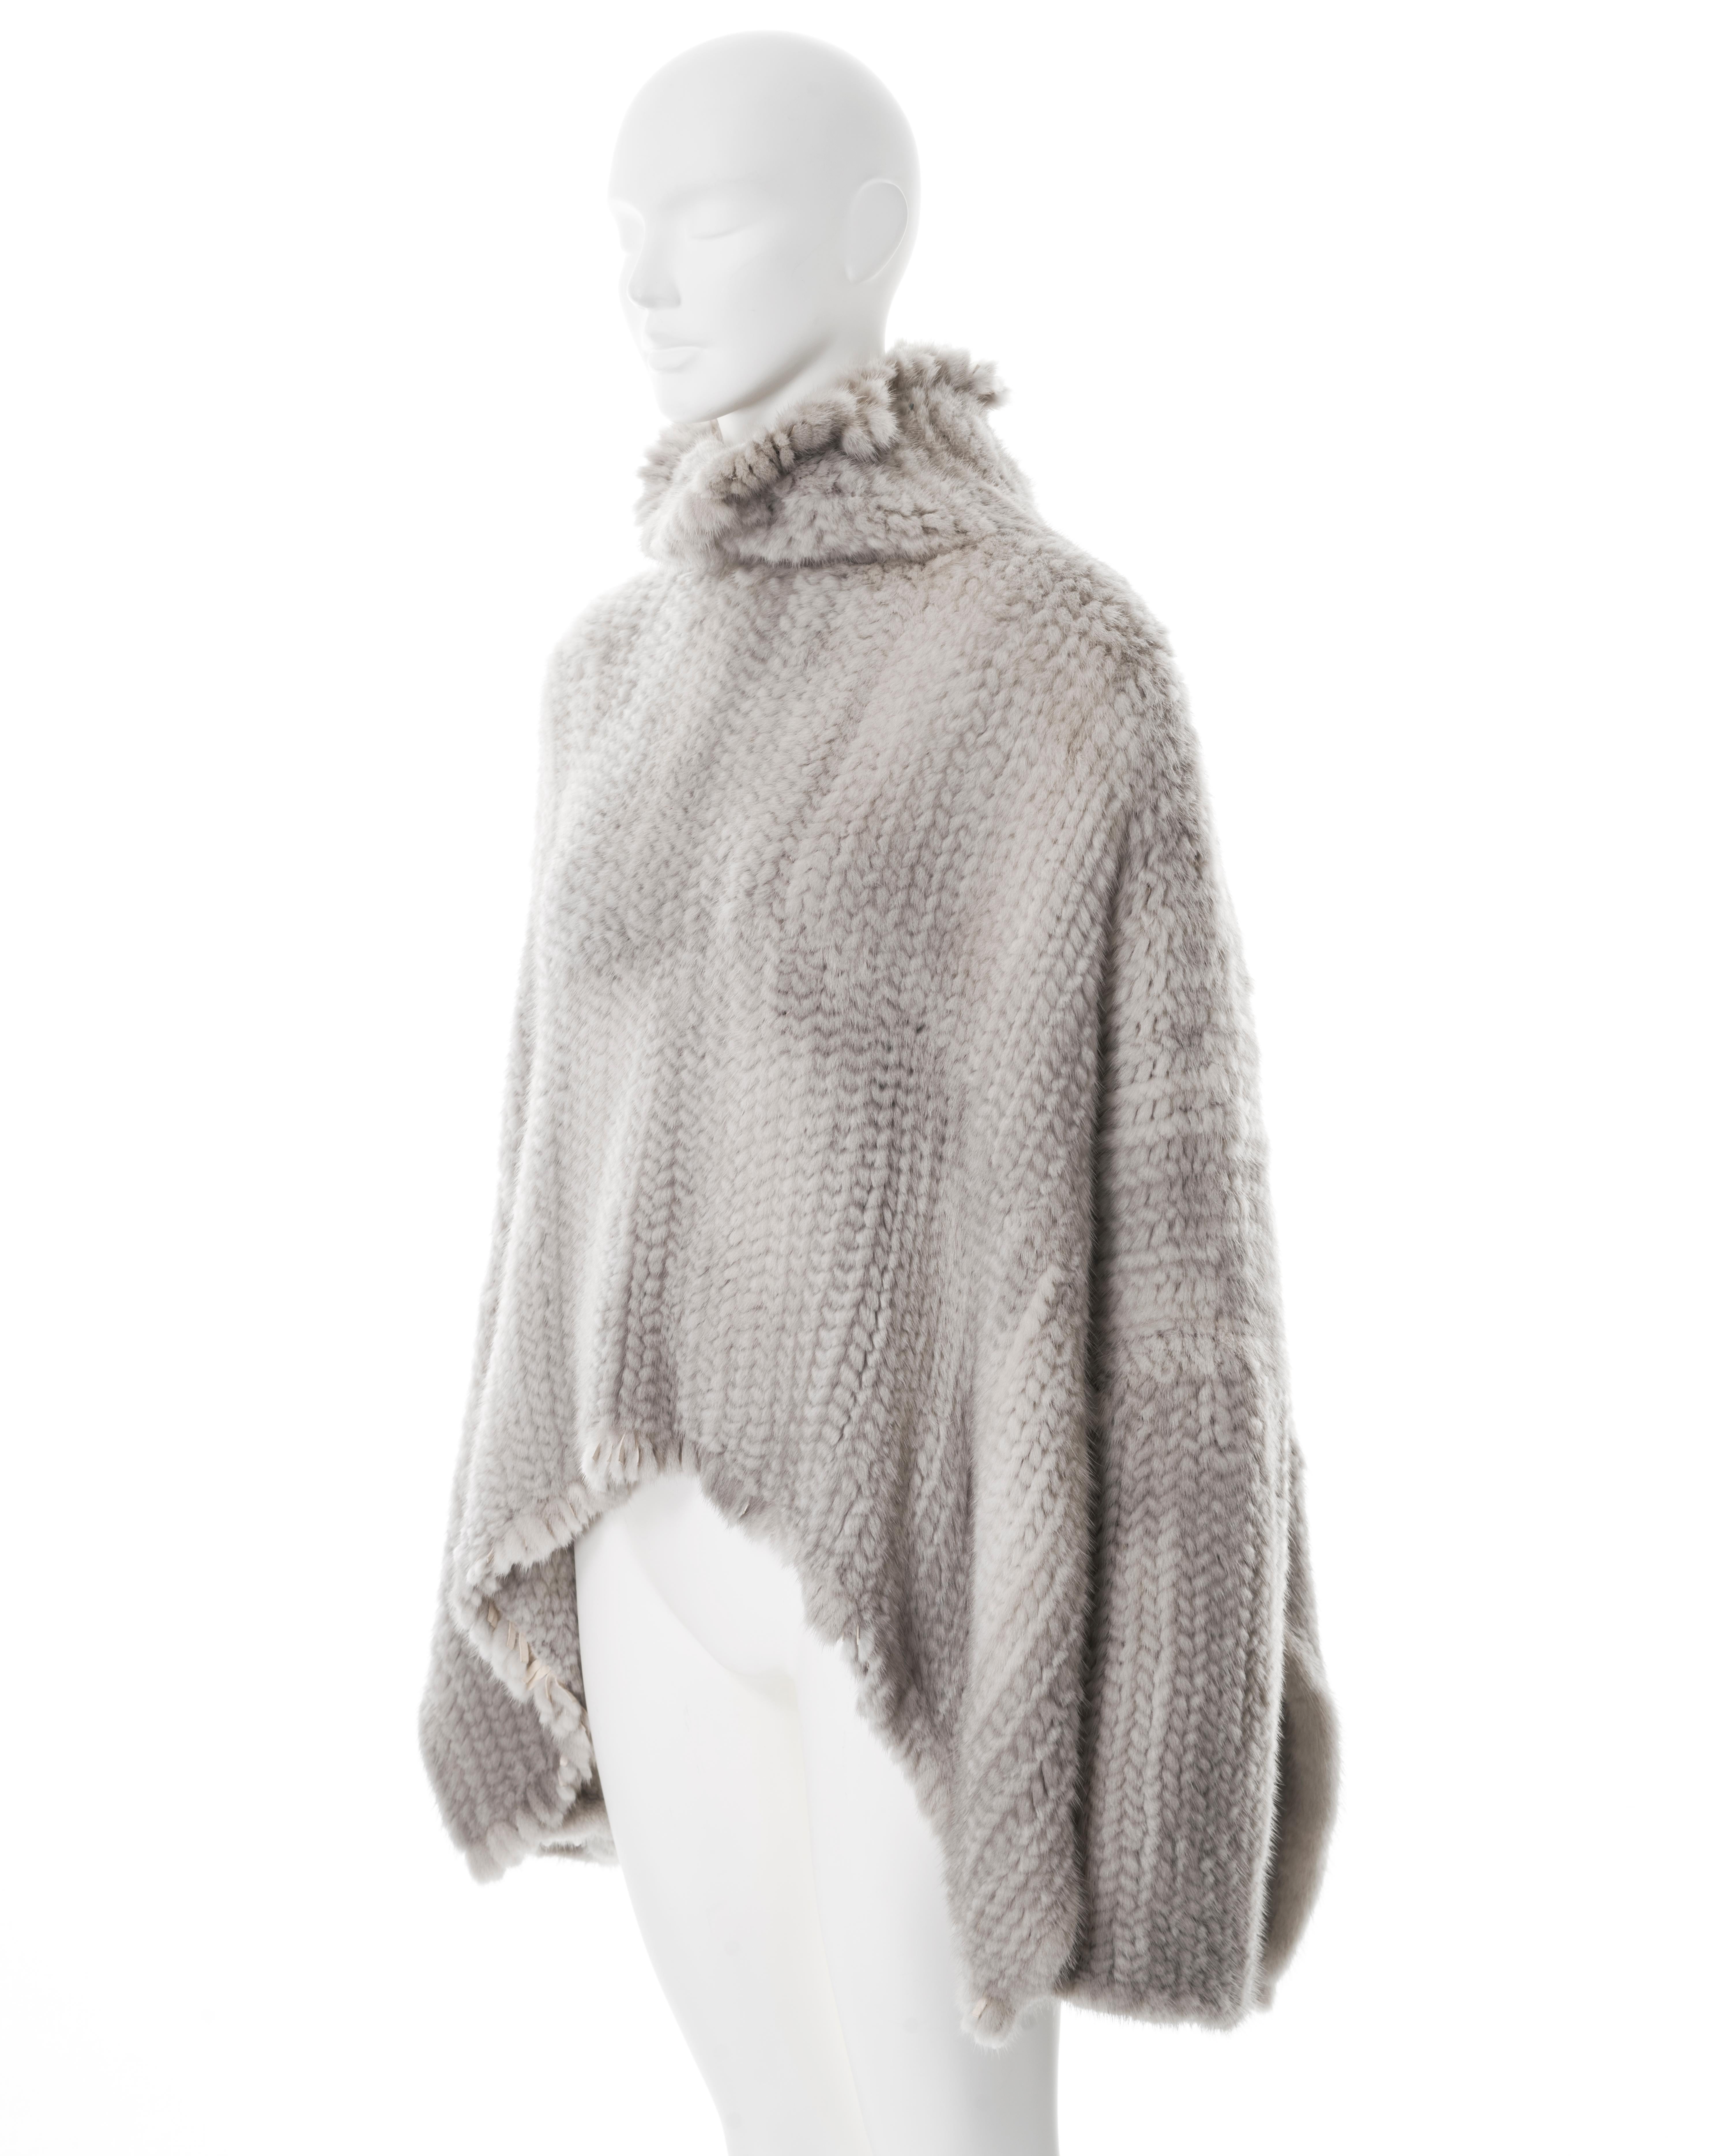 Christian Dior by John Galliano light grey knitted mink fur sweater, fw 2000 4